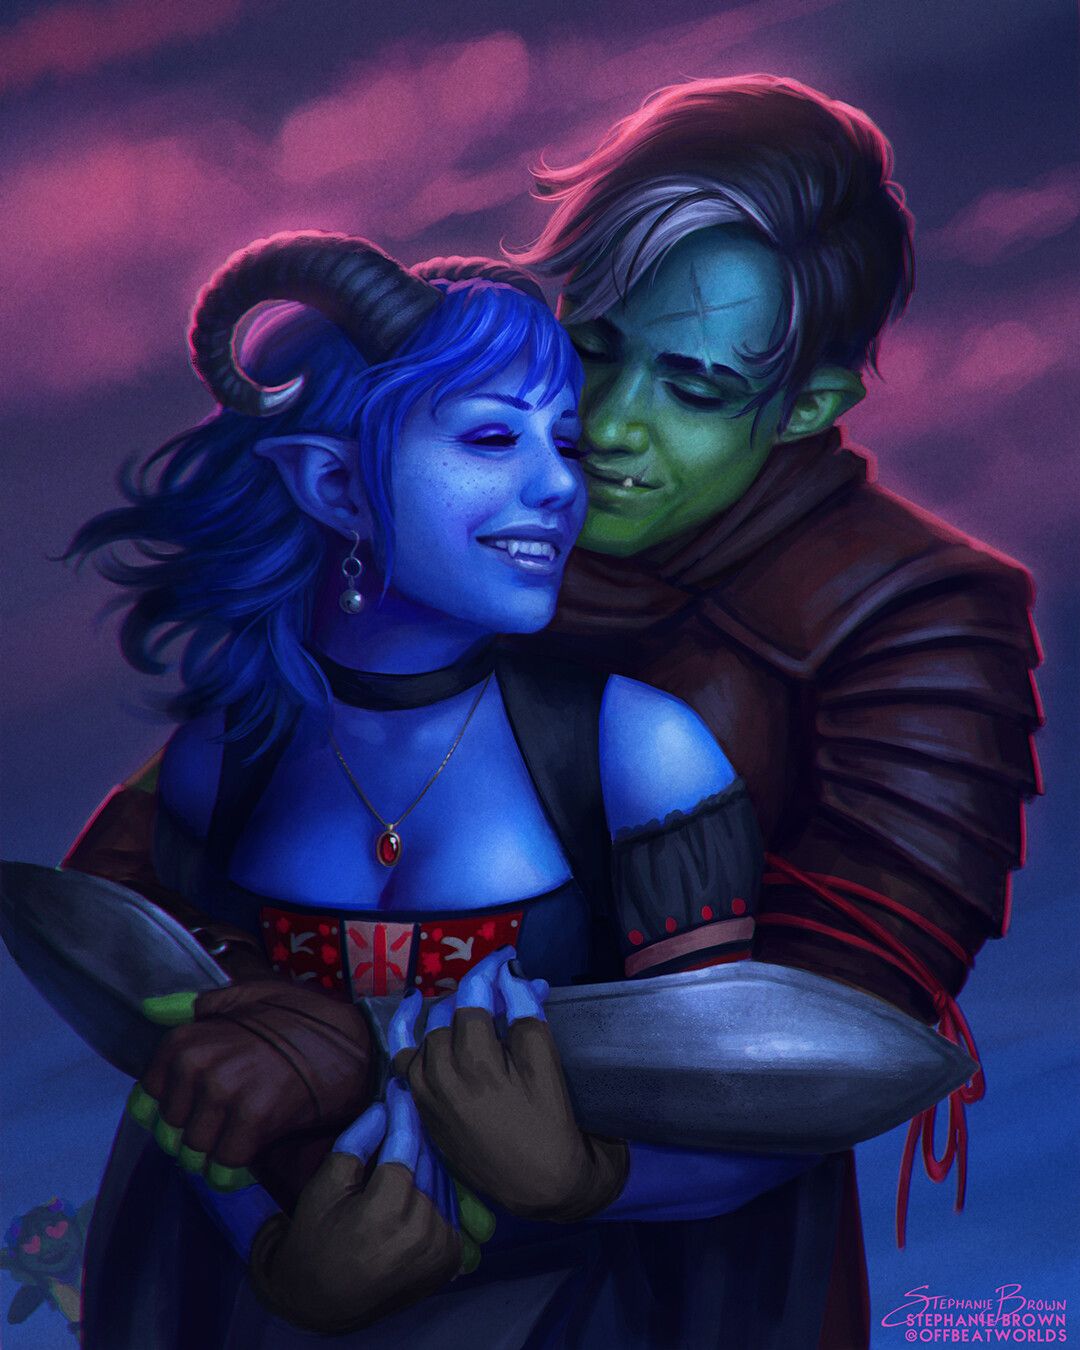 Fjord and Jester from Critical Role.